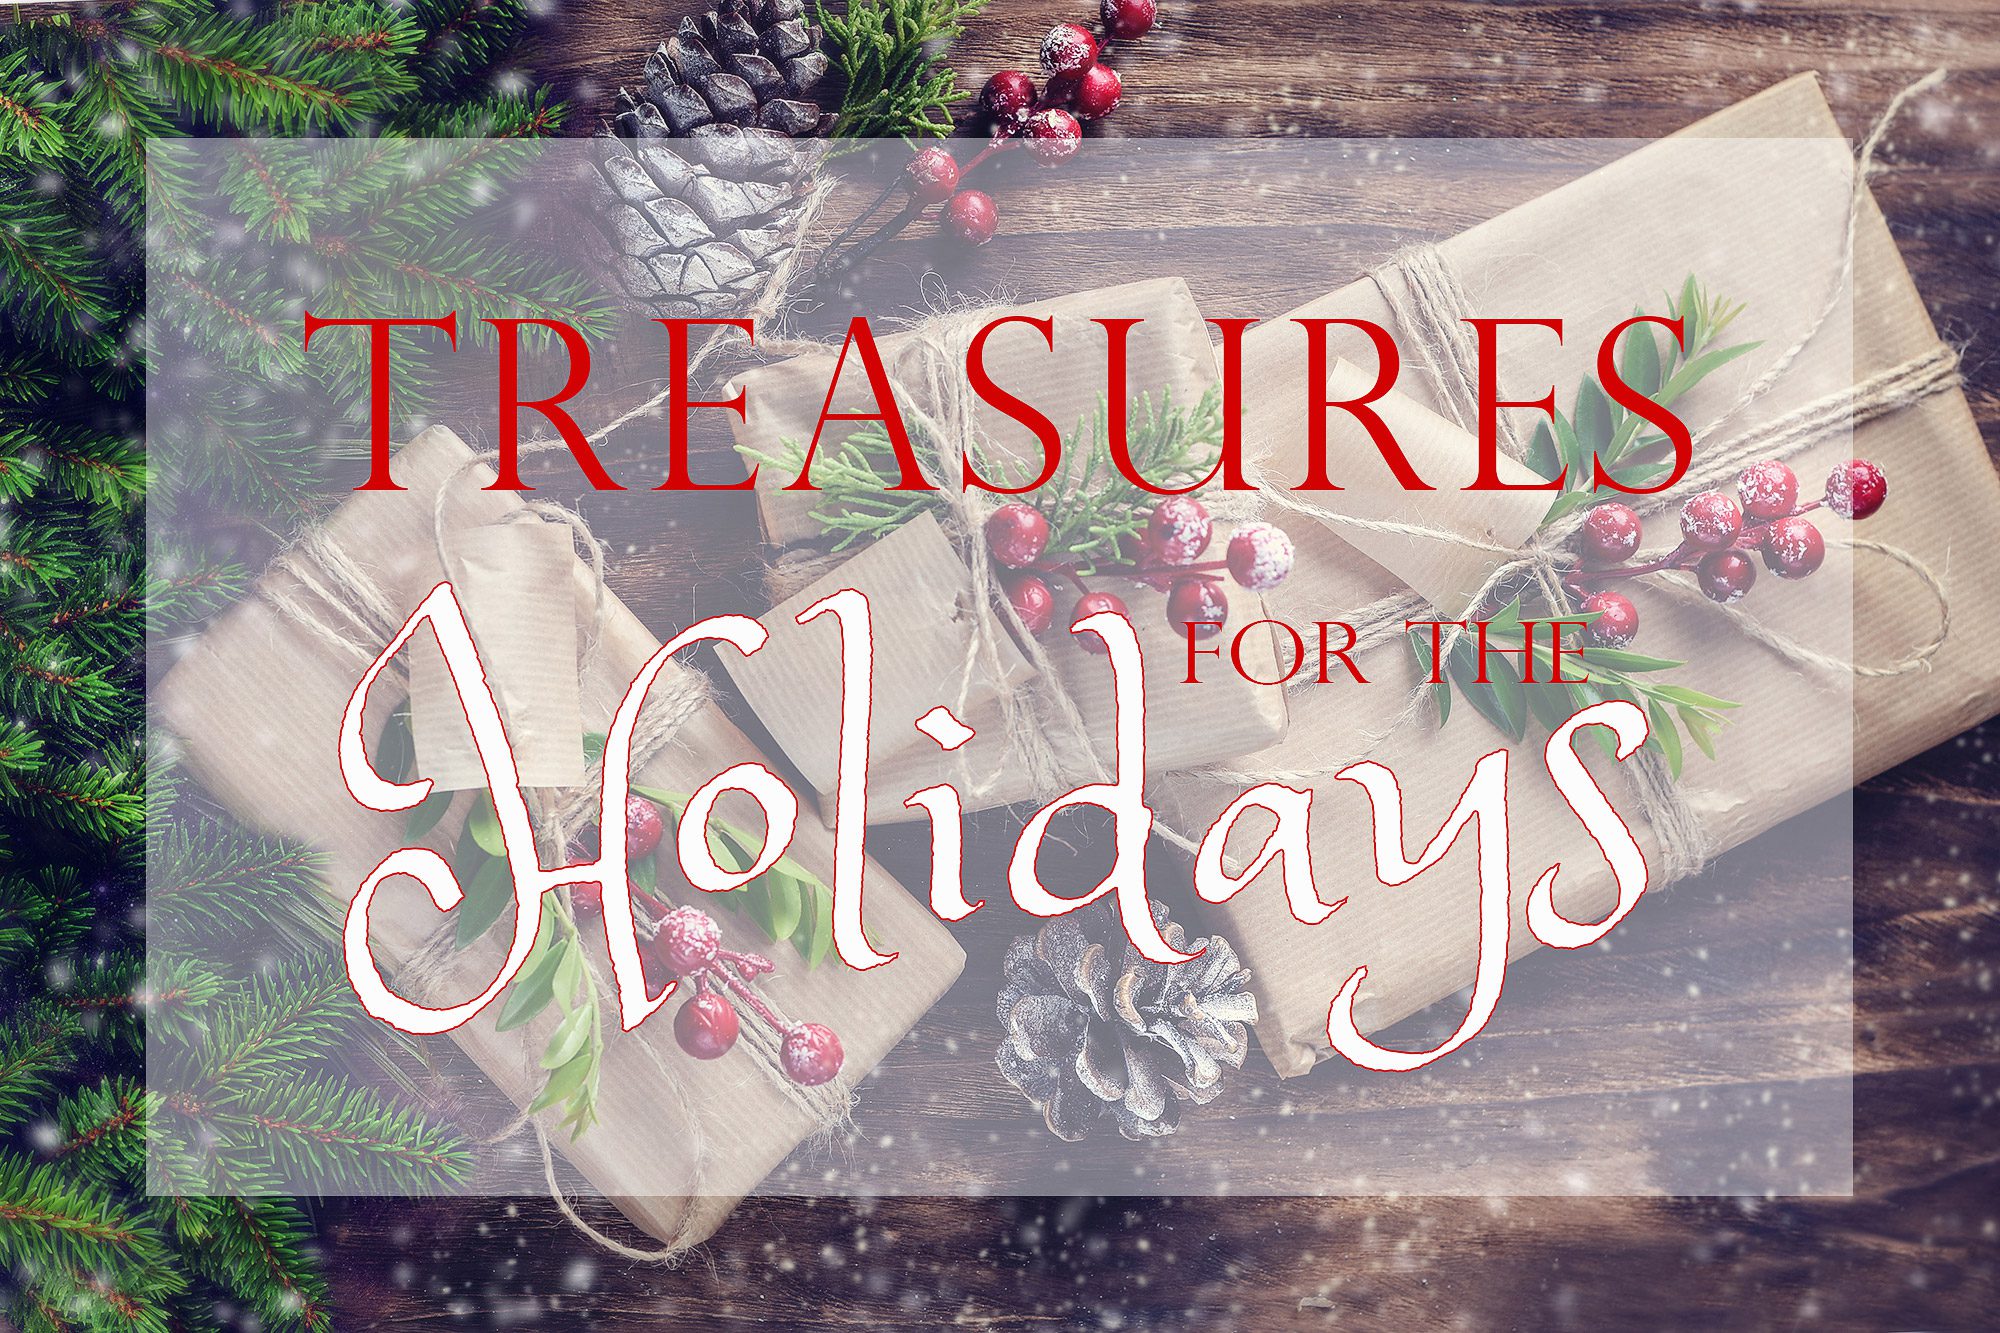 Treasures-for-the-Holidays-curated-gift-guide-2018